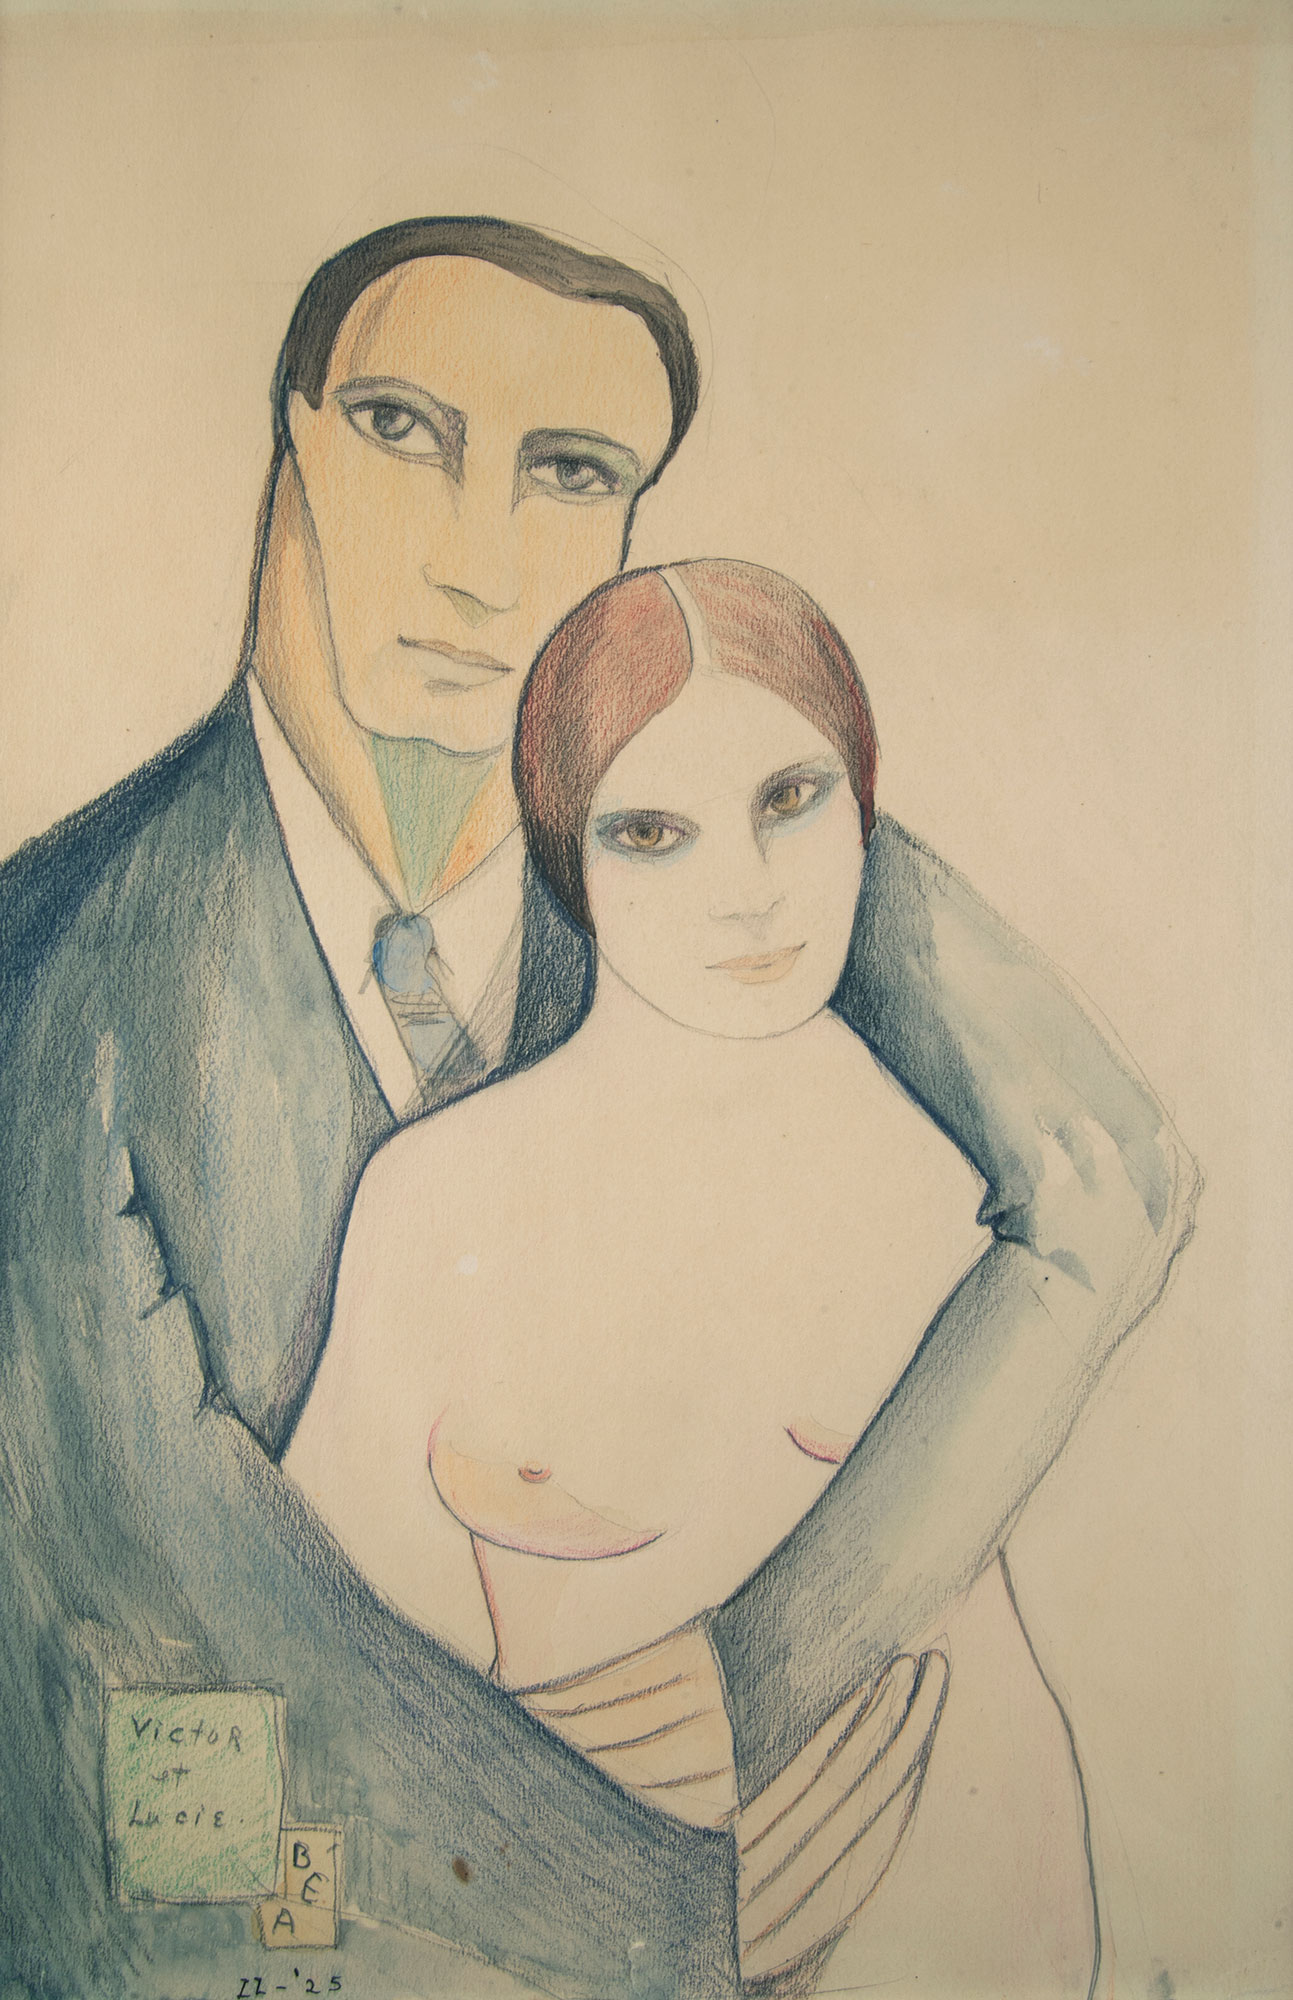 Beatrice Wood / 
Victor et Lucie, 1925 / 
pencil and colored pencil on paper / 
Sheet: 14 1/2 x 9 1/2 in. (36.8 x 24.1 cm) / 
Framed: 22 x 17 in. (55.9 x 43.2 cm)